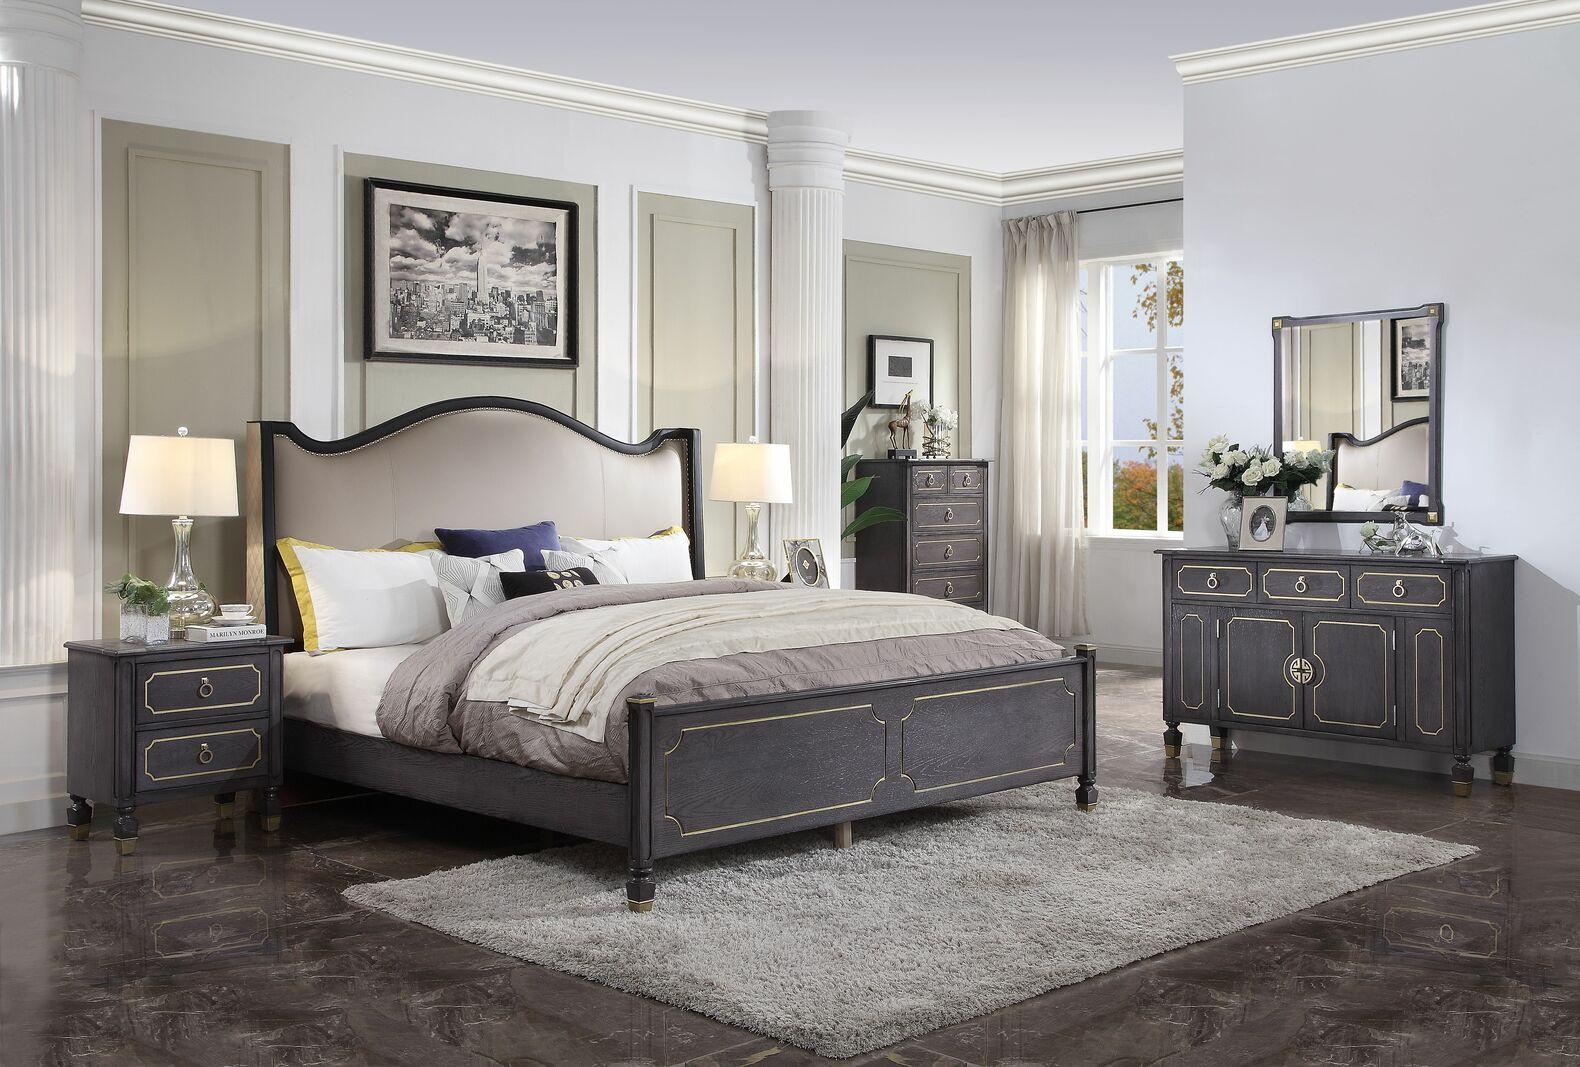 

    
Classic Tan & Tobacco California King 5pcs Bedroom Set by Acme House Marchese 28894CK-5pcs
